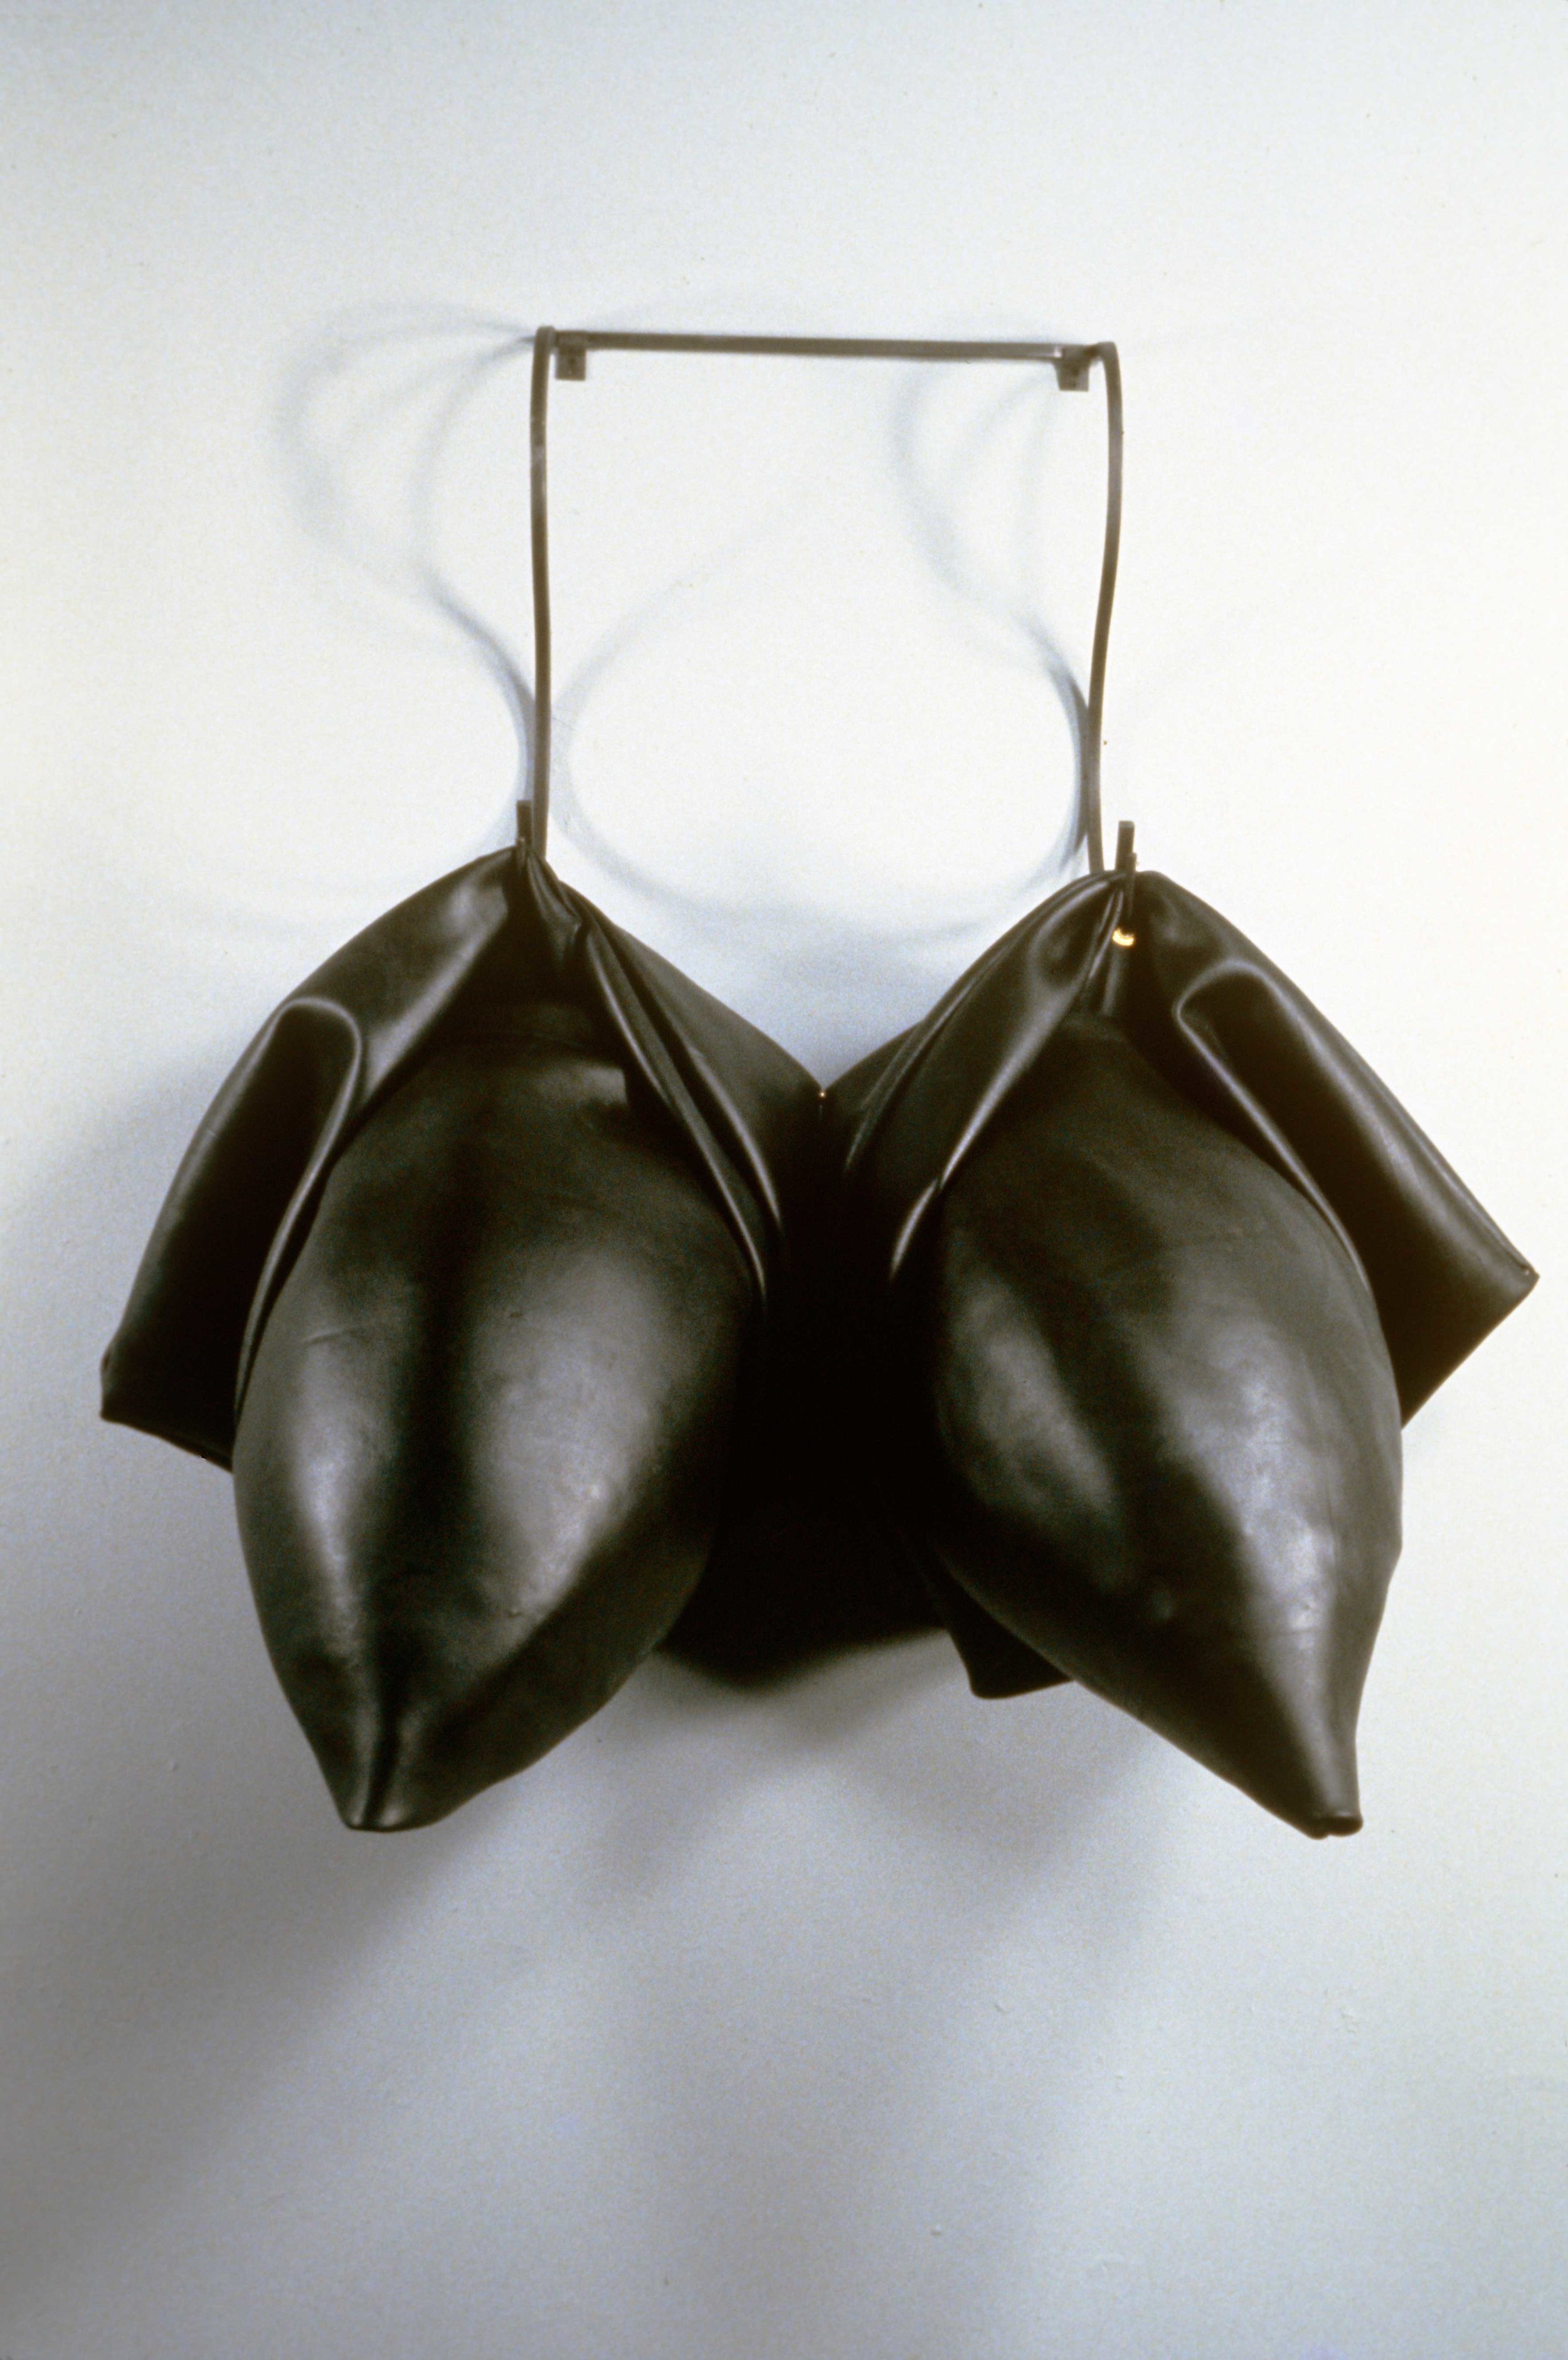   Twin Missiles   1990  rubber and steel  49 X 32 X 23"     